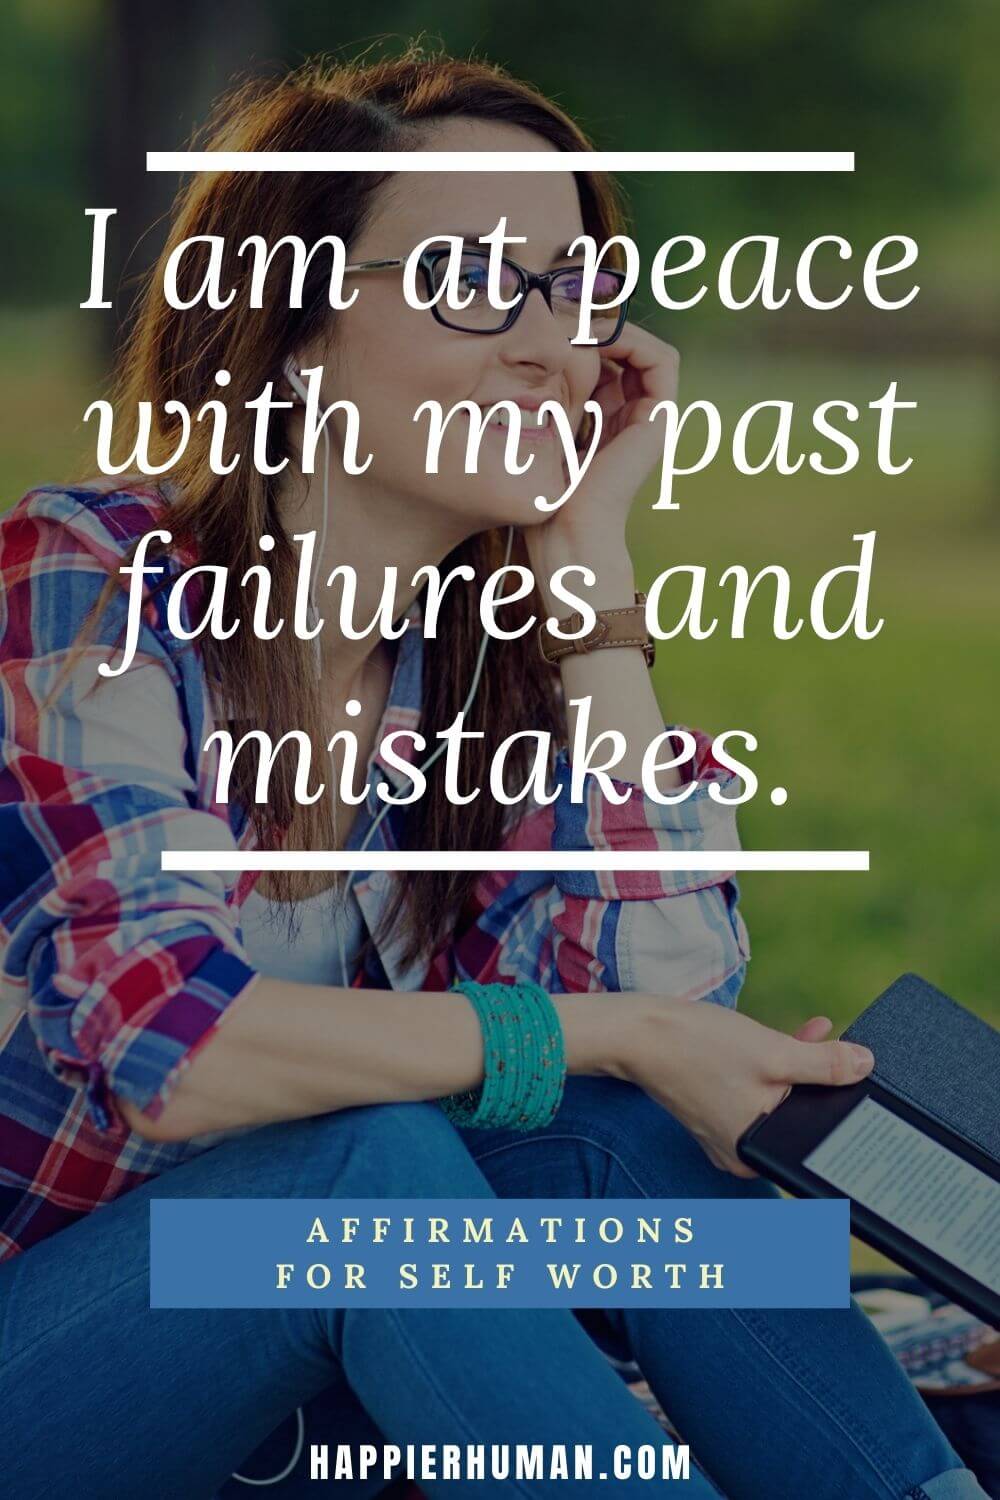 Affirmations for Self Worth - I am at peace with my past failures and mistakes. | law of attraction affirmations for self love | affirmations for confidence and success | self esteem affirmations pdf